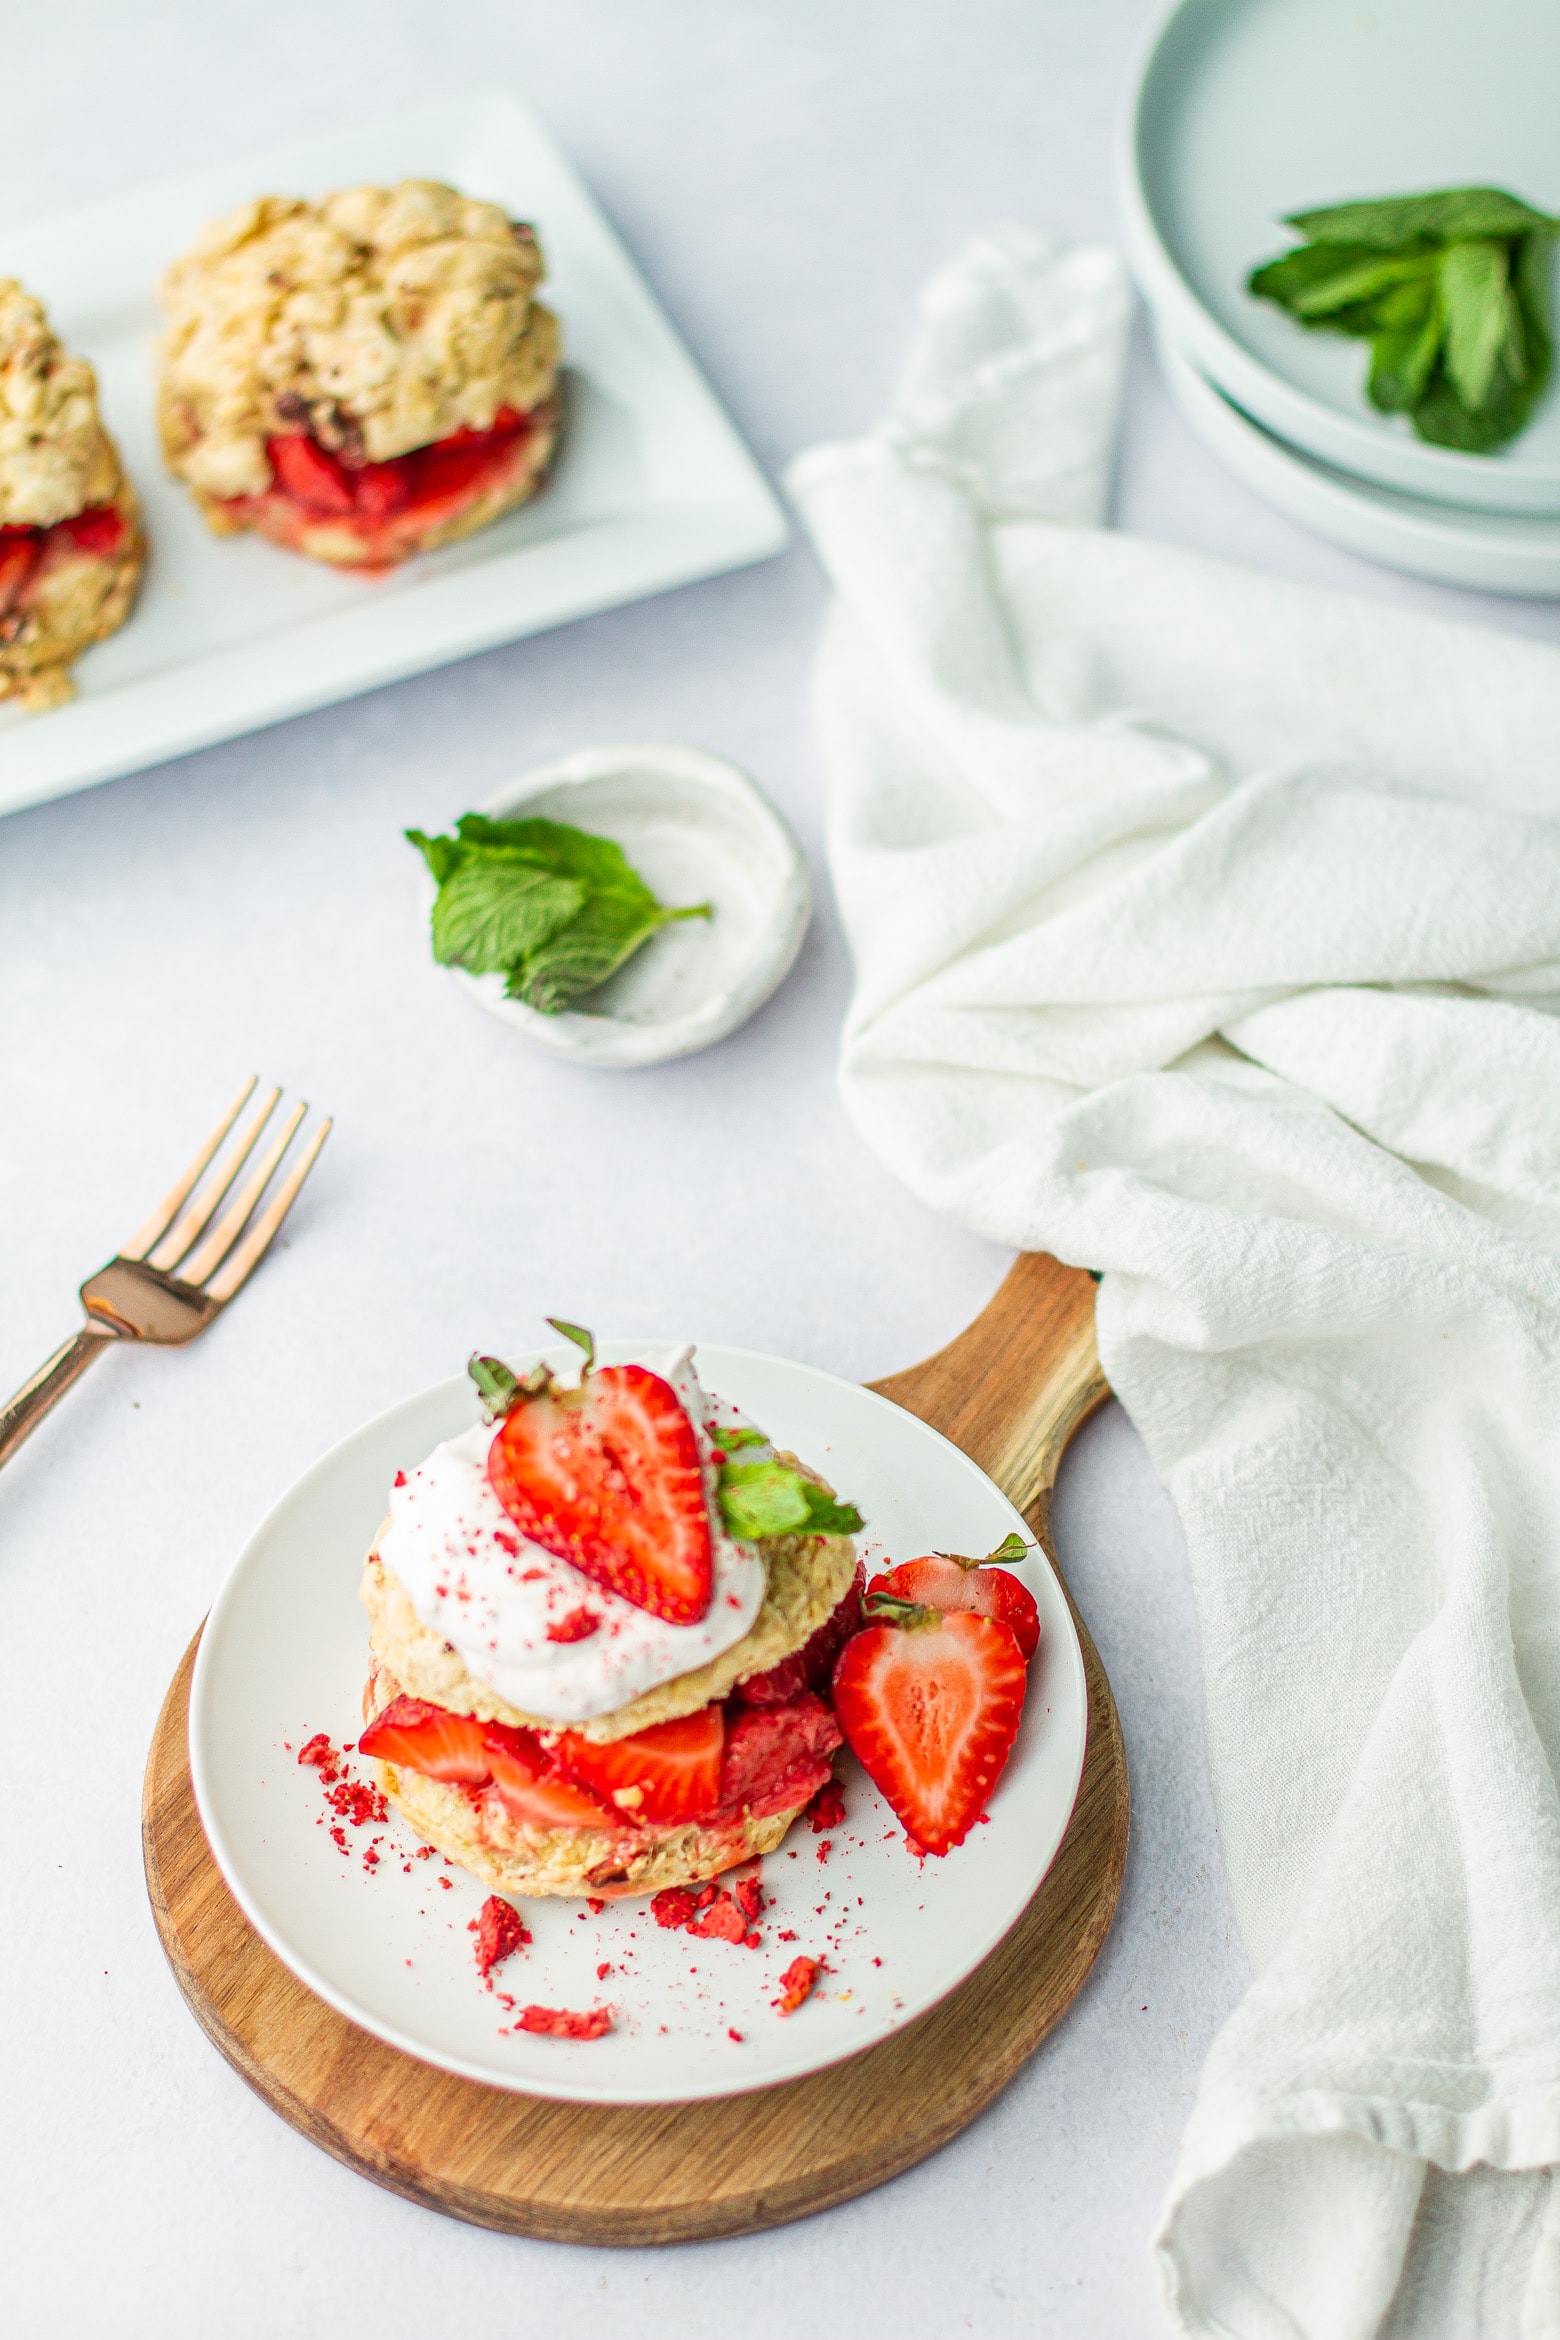 A plated portion of Very Strawberry Shortcake on a white table